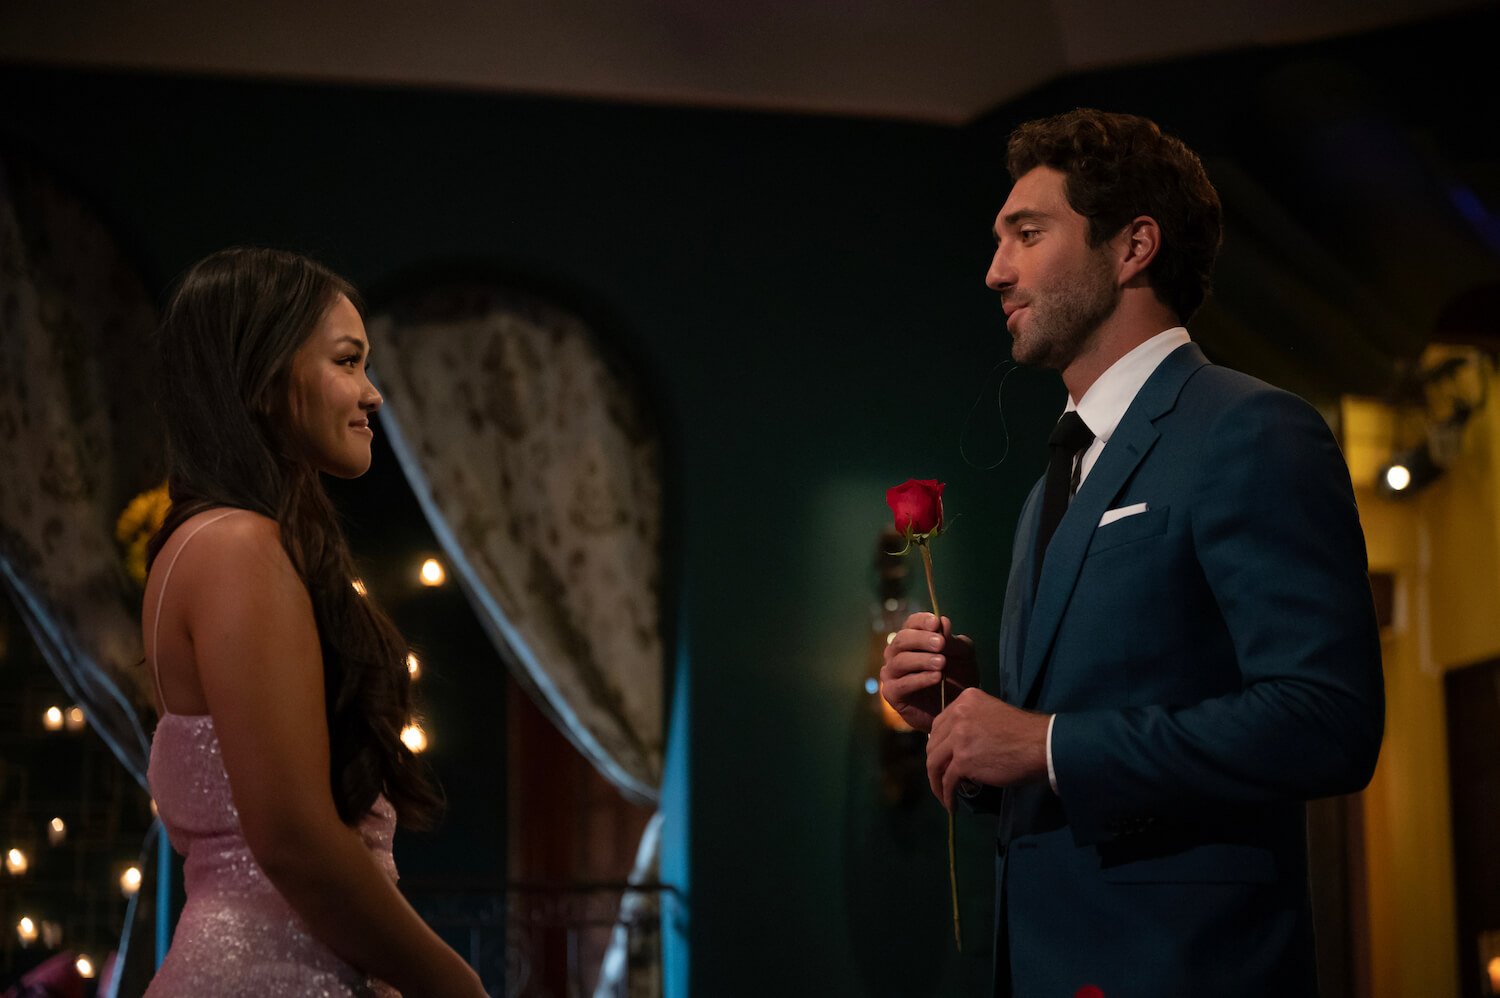 'The Bachelor' Season 28 premiere rose ceremony with Joey Graziadei giving a rose to Jenn Tran